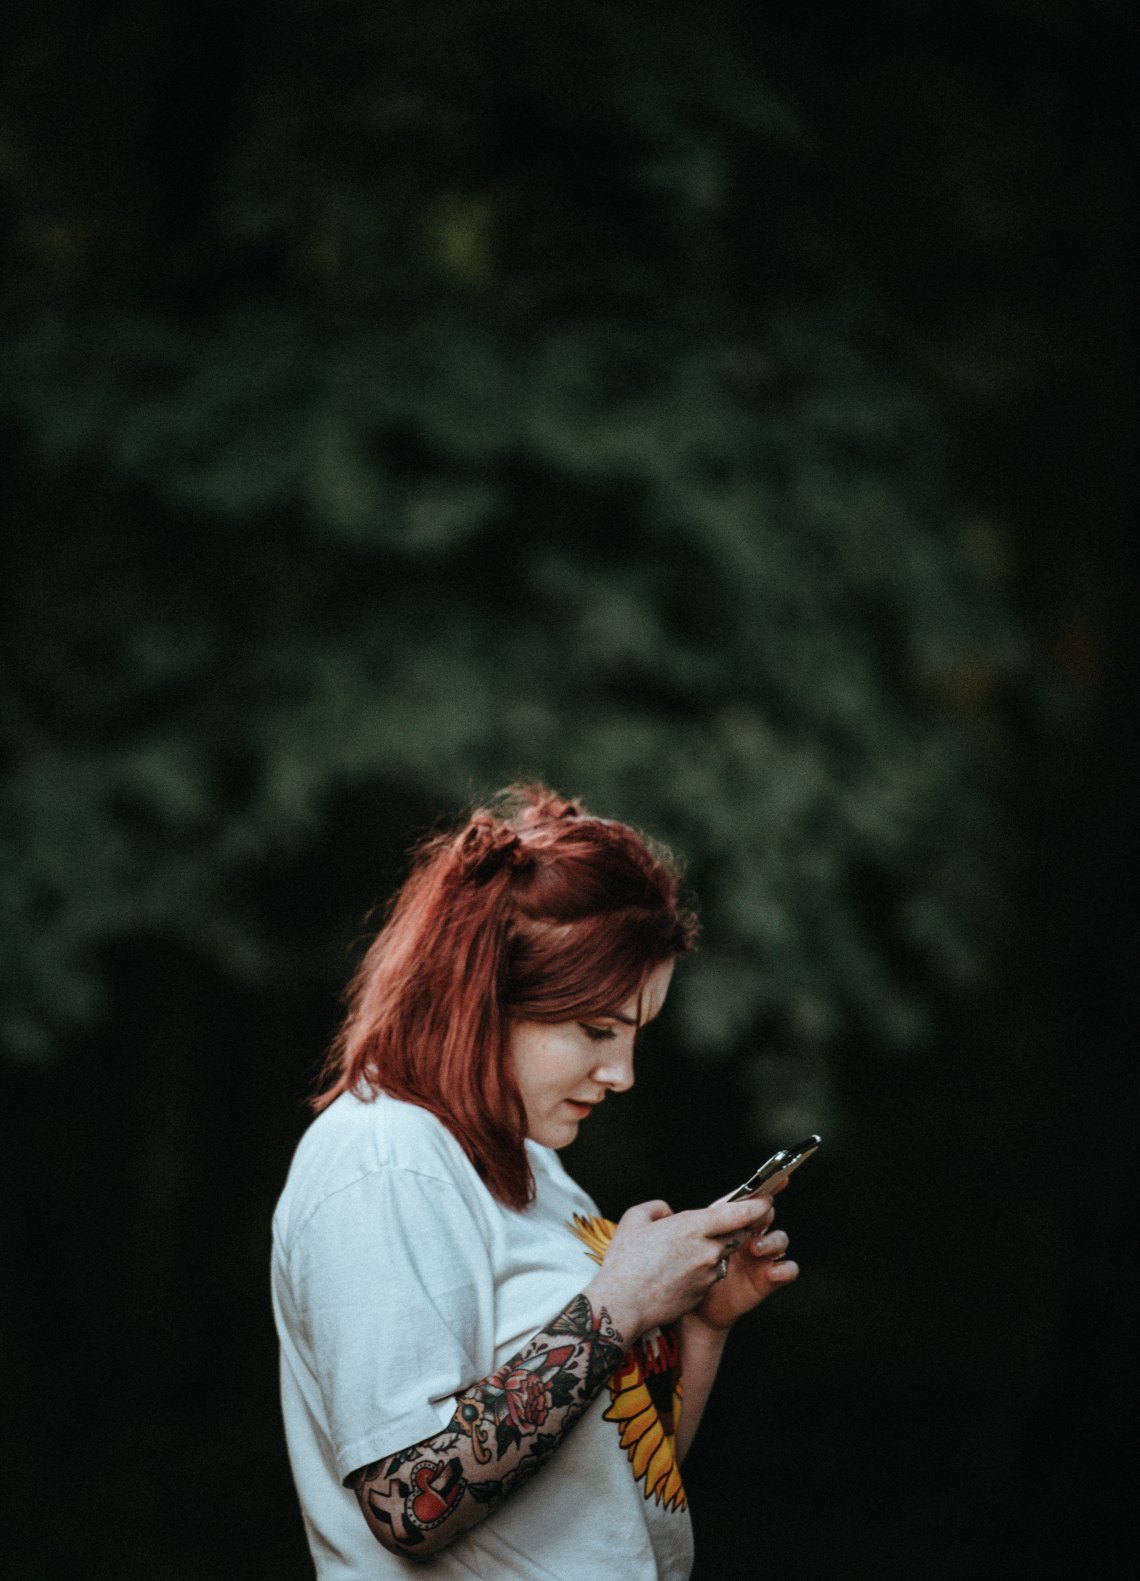 A girl texting